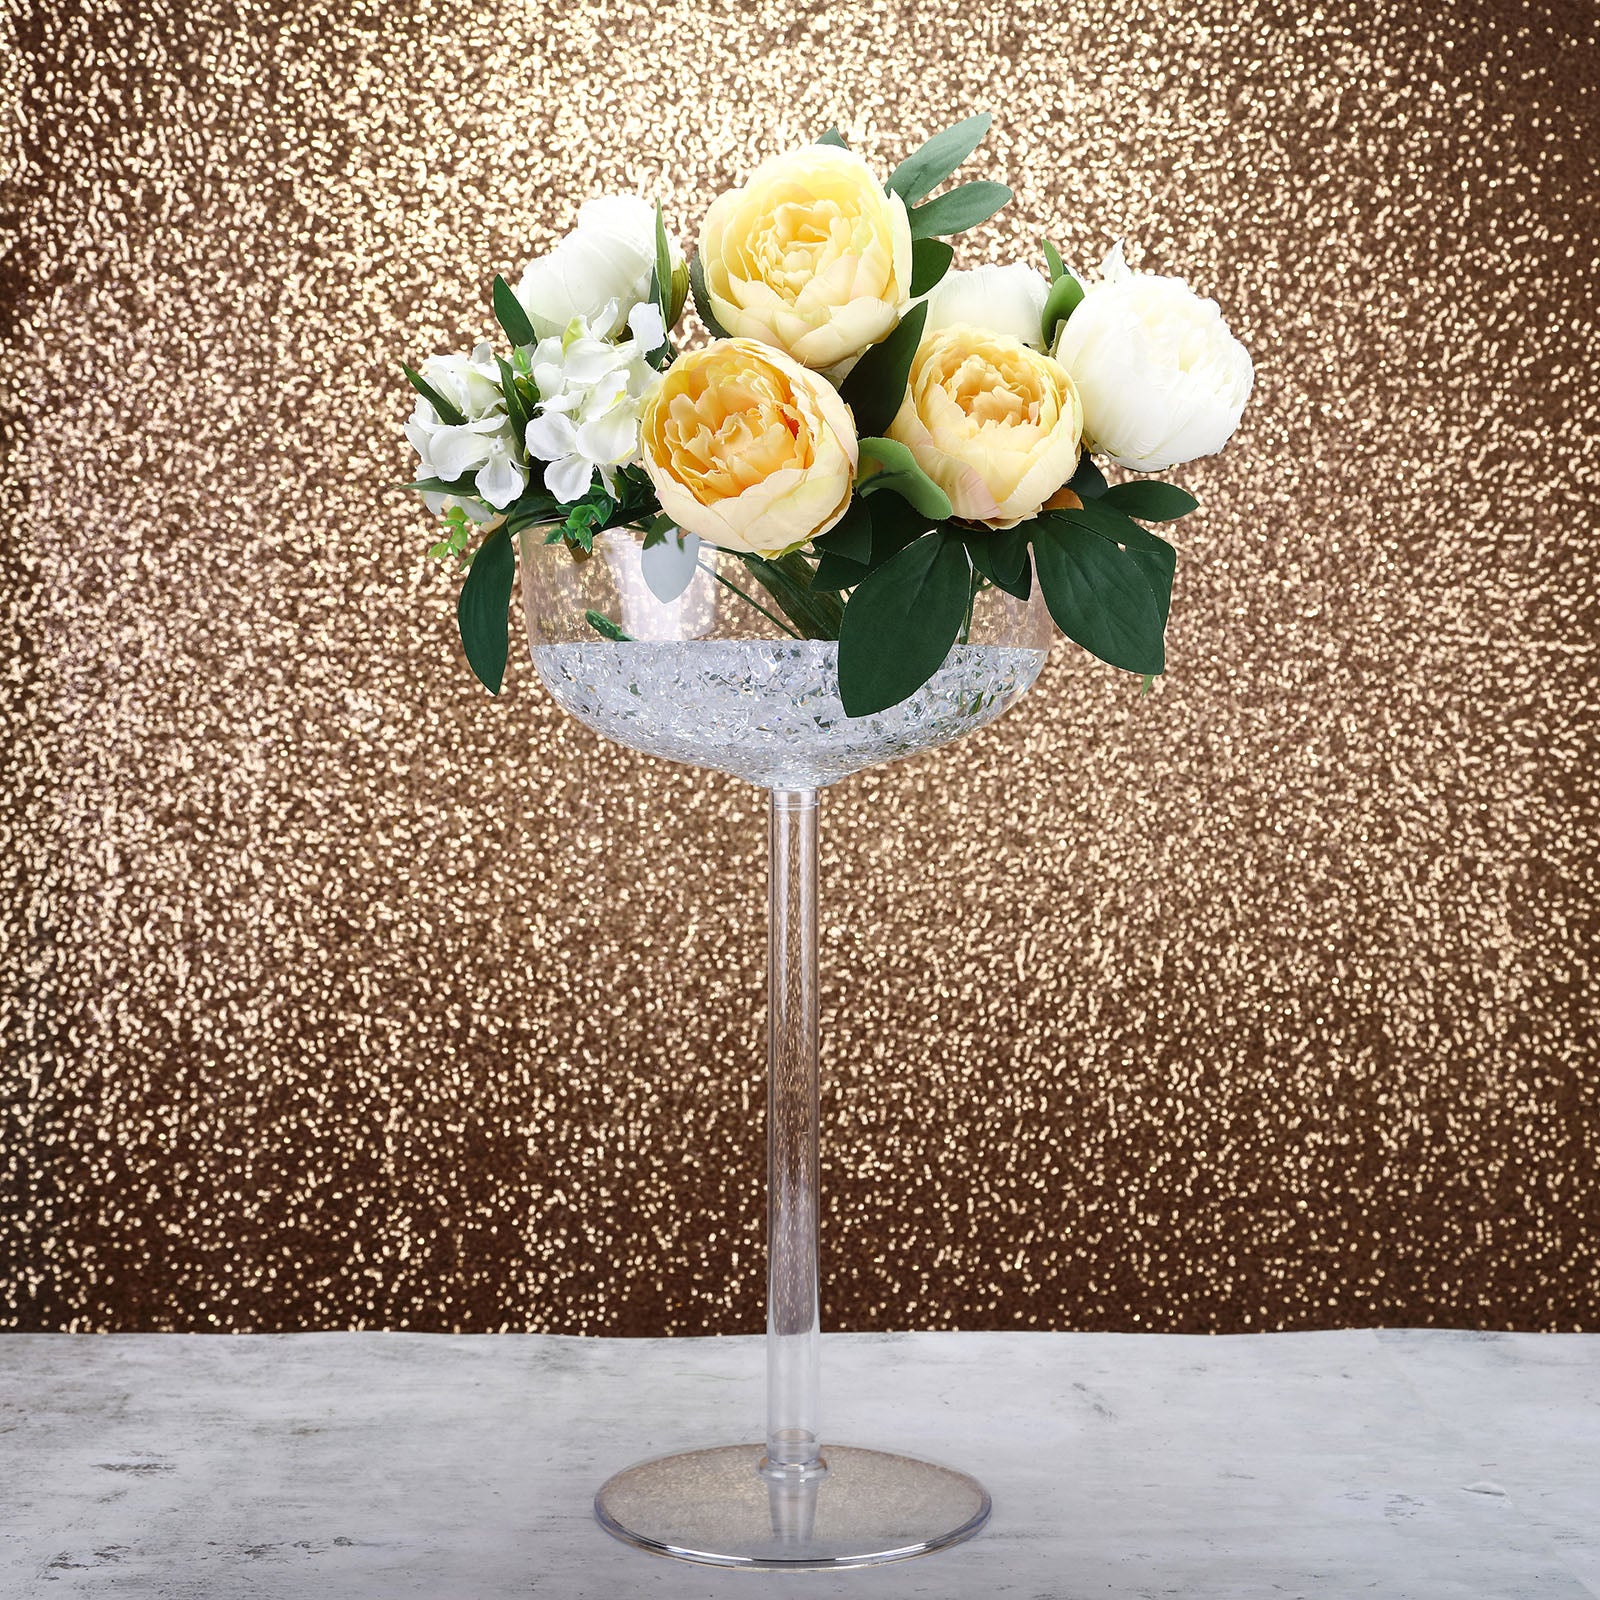 4 Pack | 18 Long Stem Clear Plastic Champagne Glass Flower Vases with Fillable Stems, Wedding Centerpieces | by Tableclothsfactory